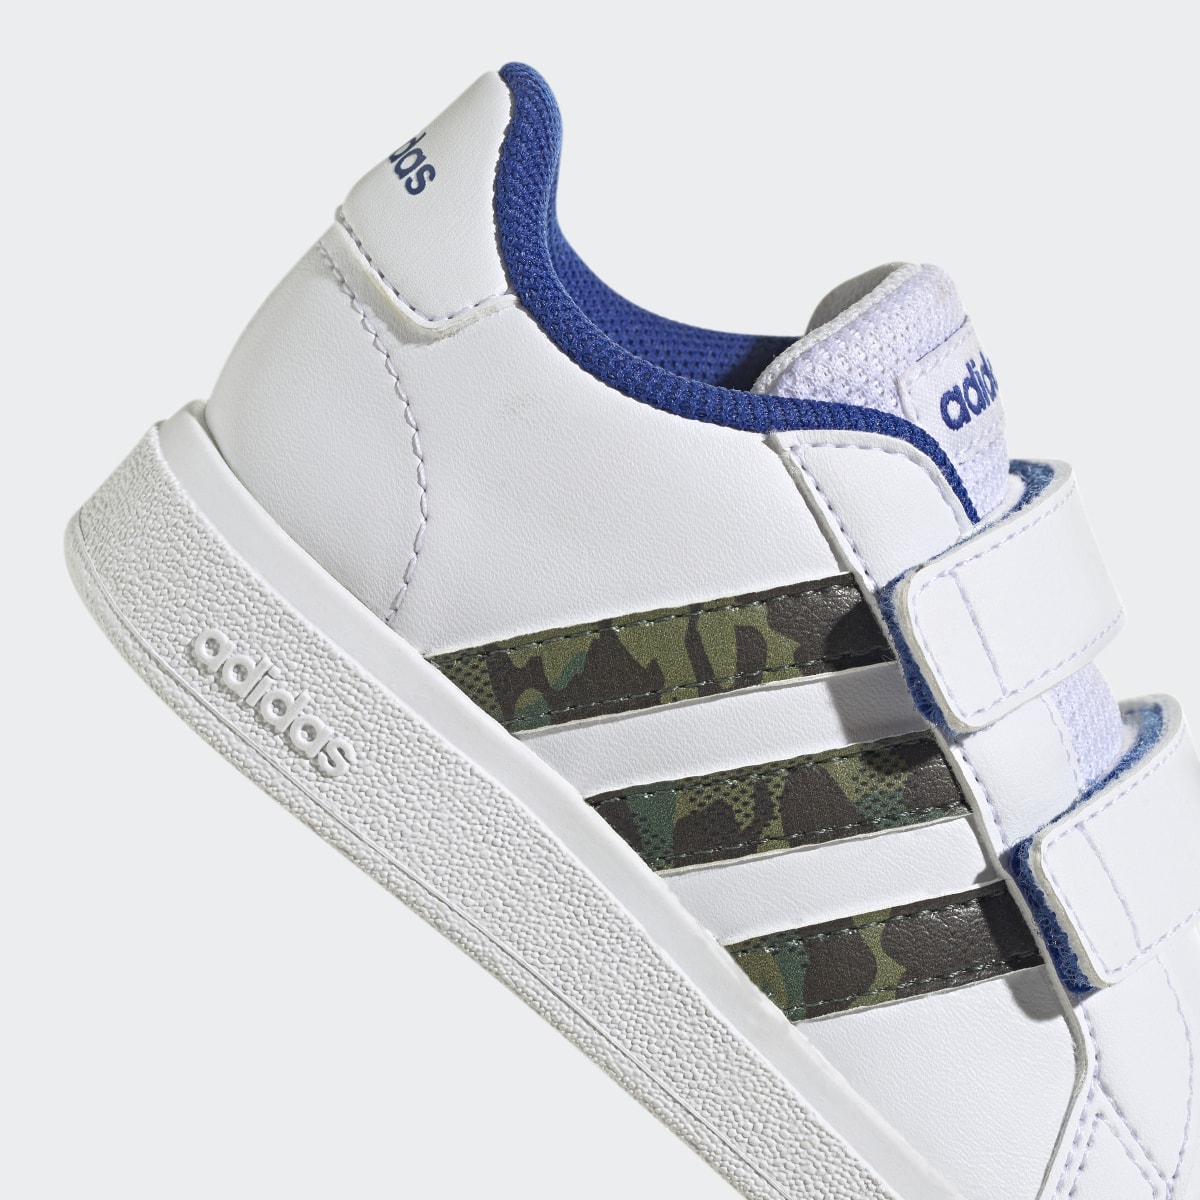 Adidas Grand Court Lifestyle Hook and Loop Schuh. 9